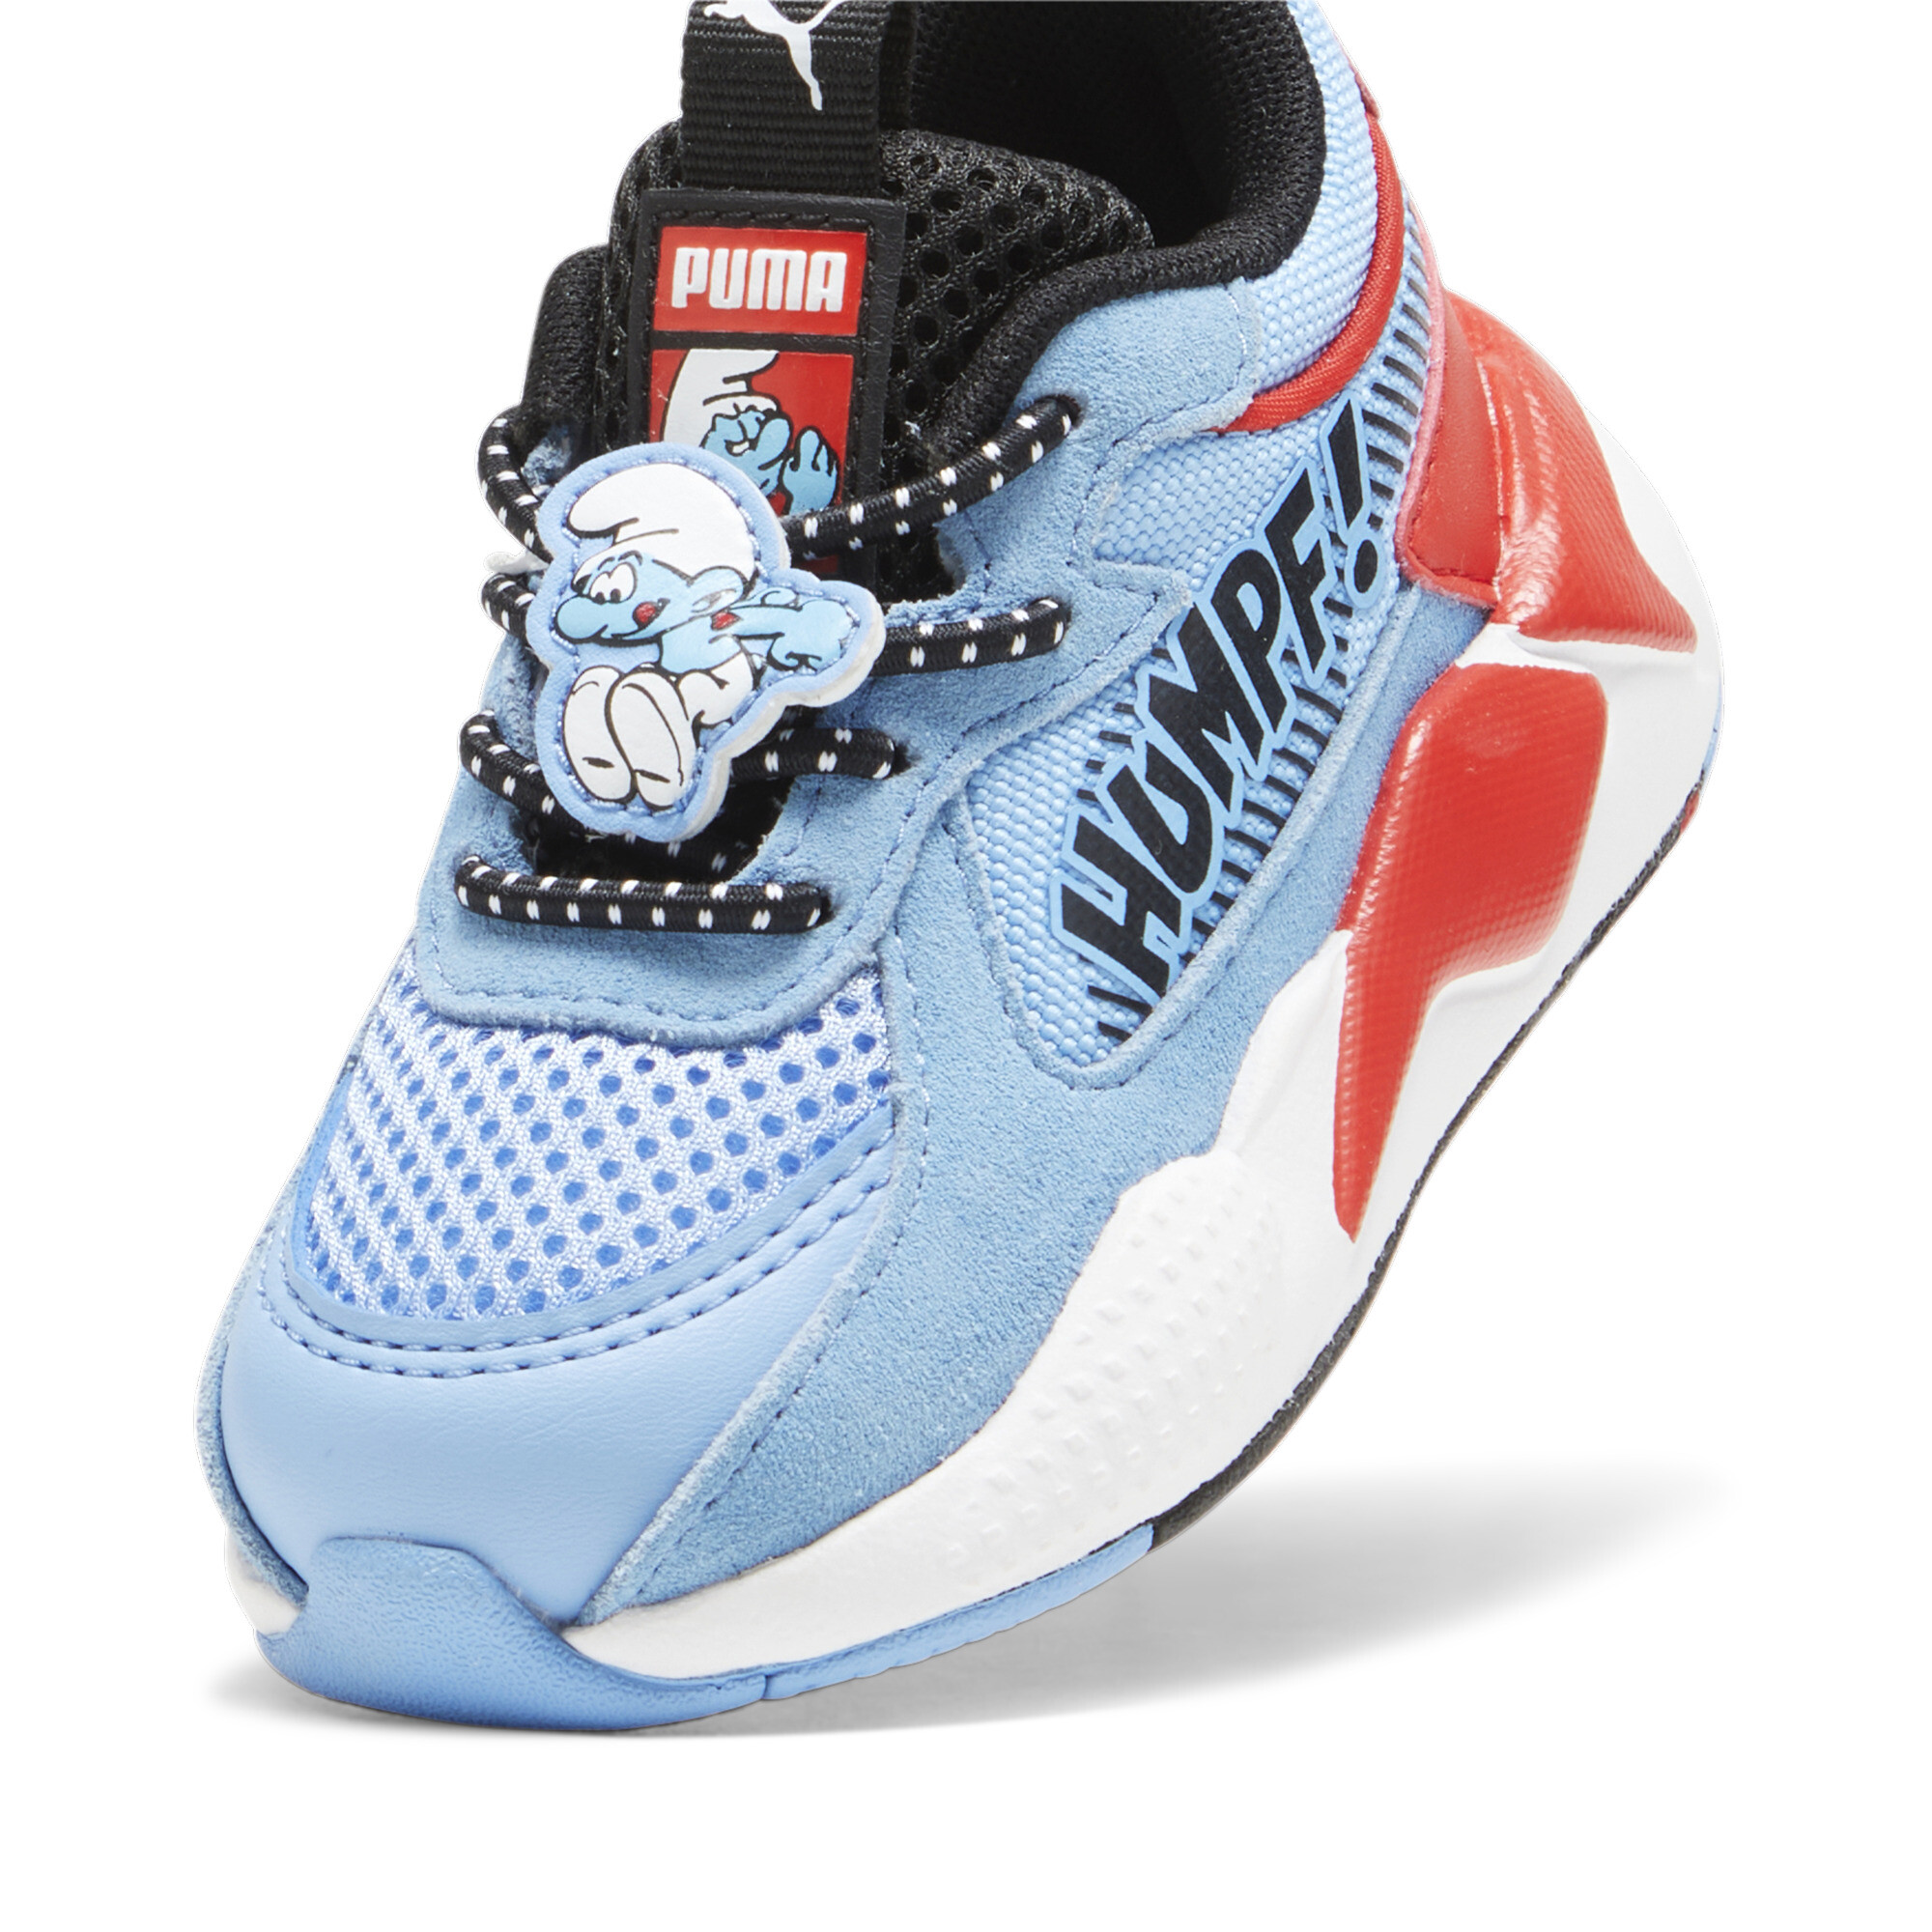 Kids' PUMA X THE SMURFS RS-X Toddlers' Sneakers In Blue, Size EU 24